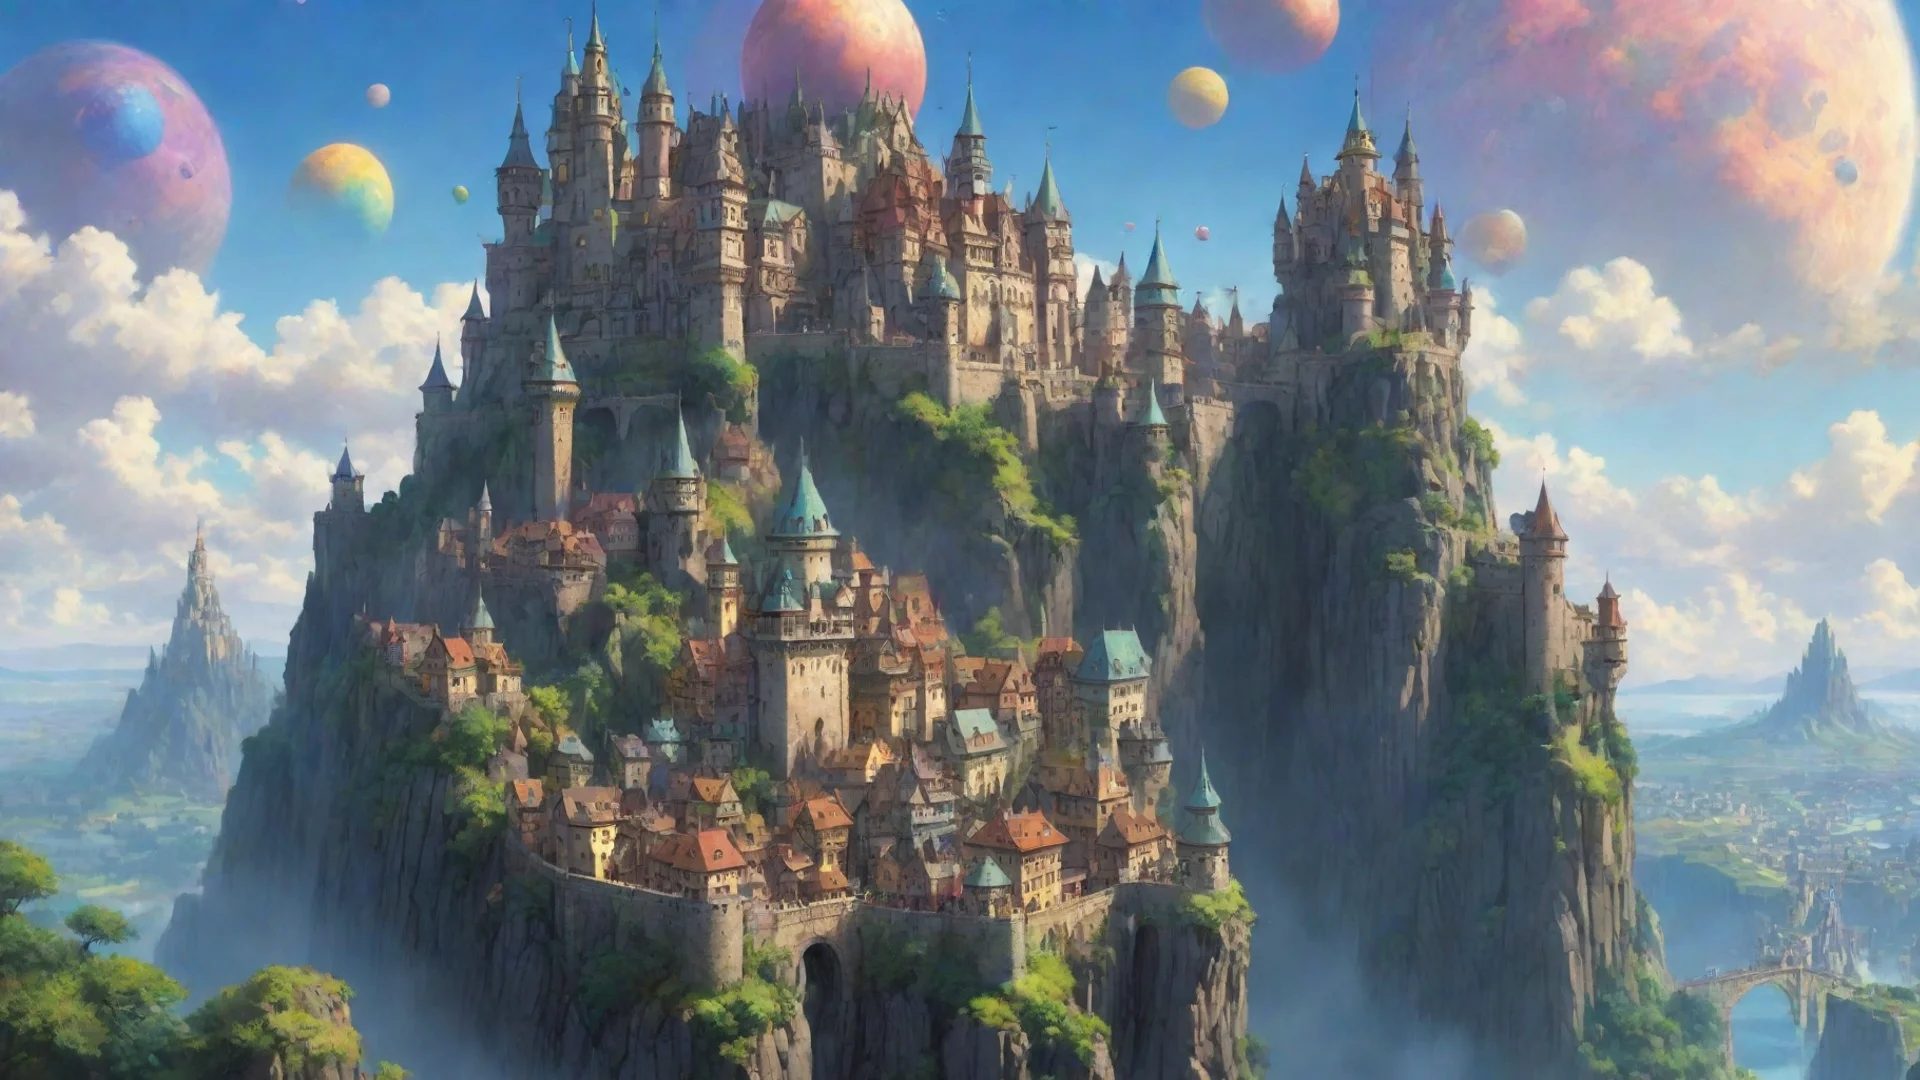 aiartstation art fantasy art ghibli miyazaki hd best quality aesthetic flying castle colorful planets city fortress  confident engaging wow 3 wide